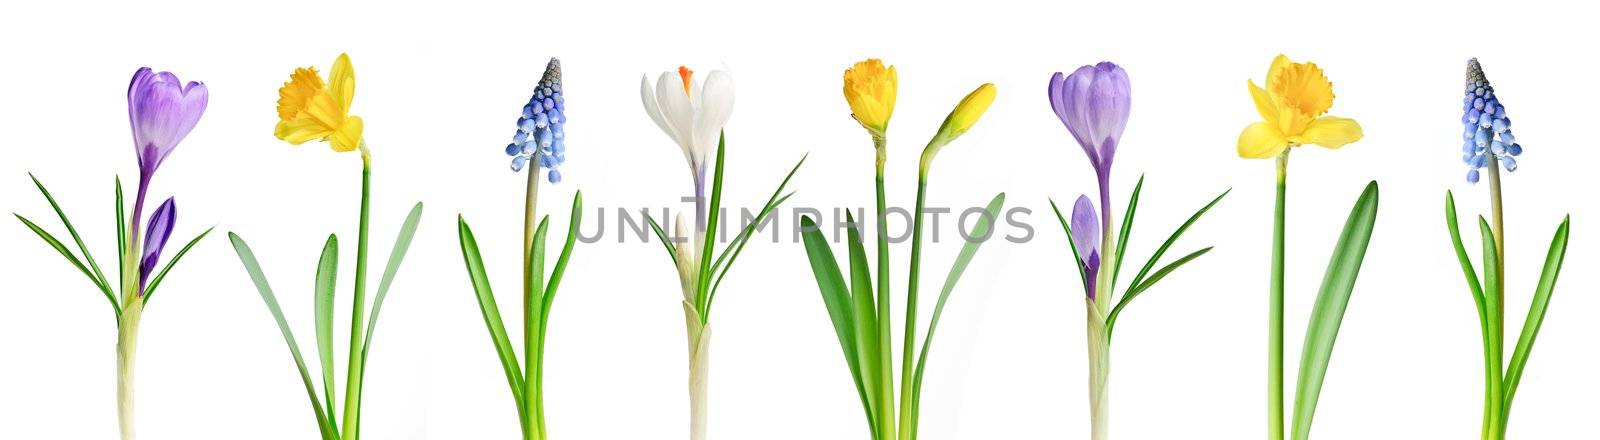 Assorted spring flowers in a row isolated on white background